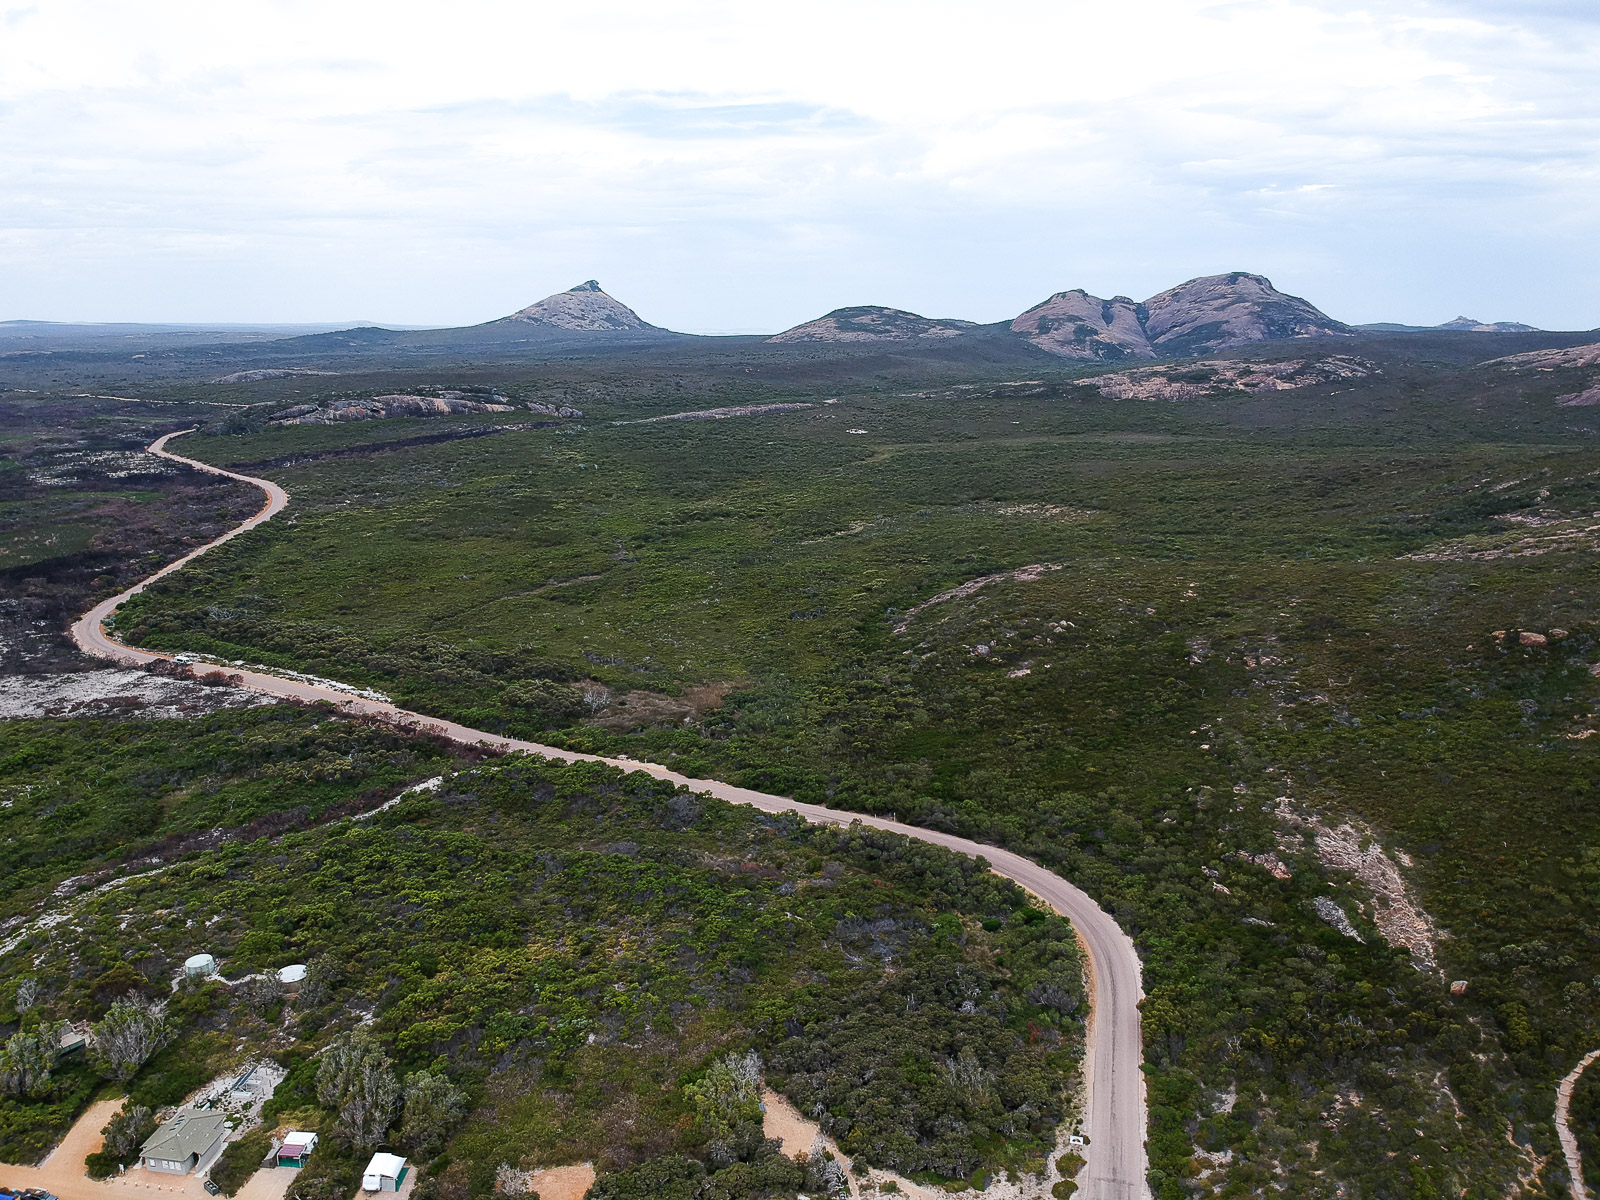 Hiking Frenchman Peak is one of the best things to do in Esperance